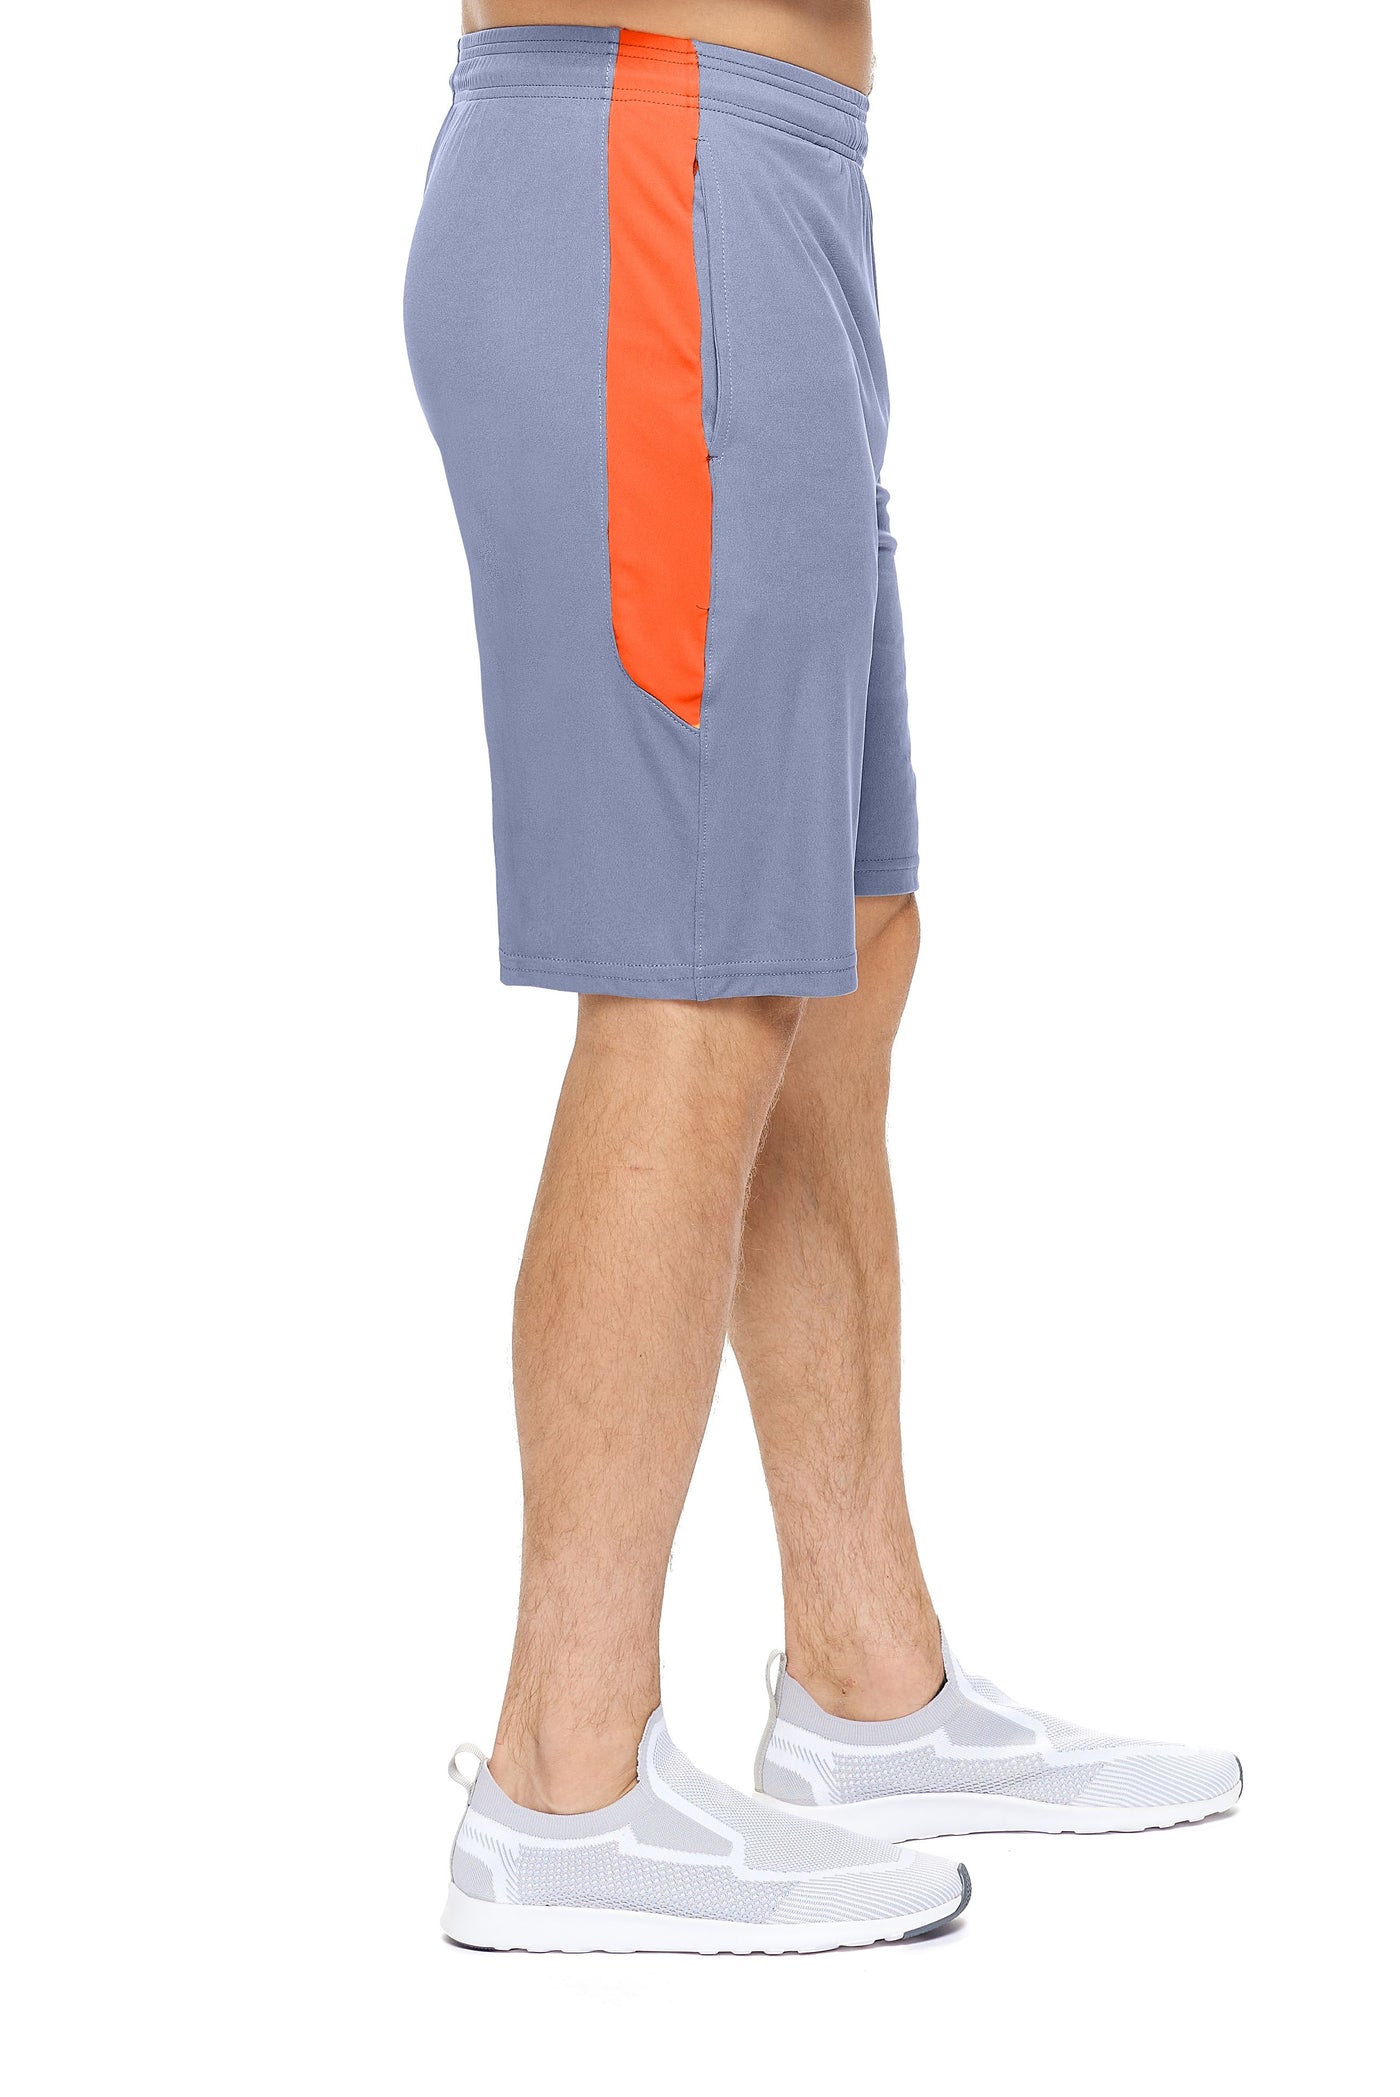 DriMax™ Outdoor Shorts 🇺🇸 - Expert Brand Apparel#color_steel-safety-orange